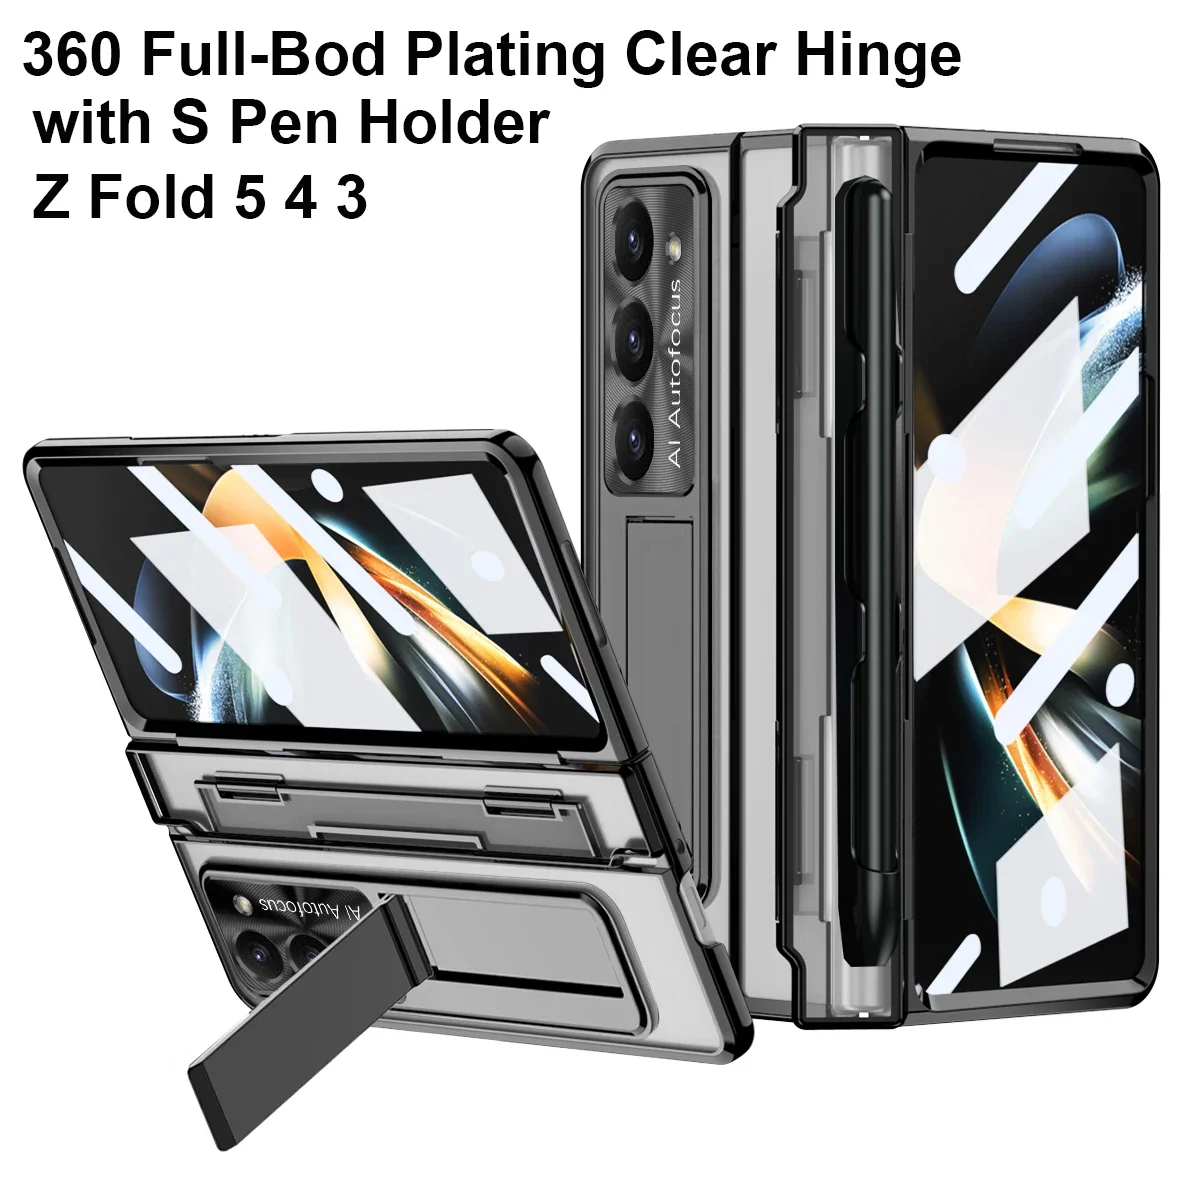 

with S Pen Holder Plating Clear Hinge Case For Samsung Galaxy Z Fold 5 4 360 Full Protector Kickstand Z Fold 3 Shockproof Cover